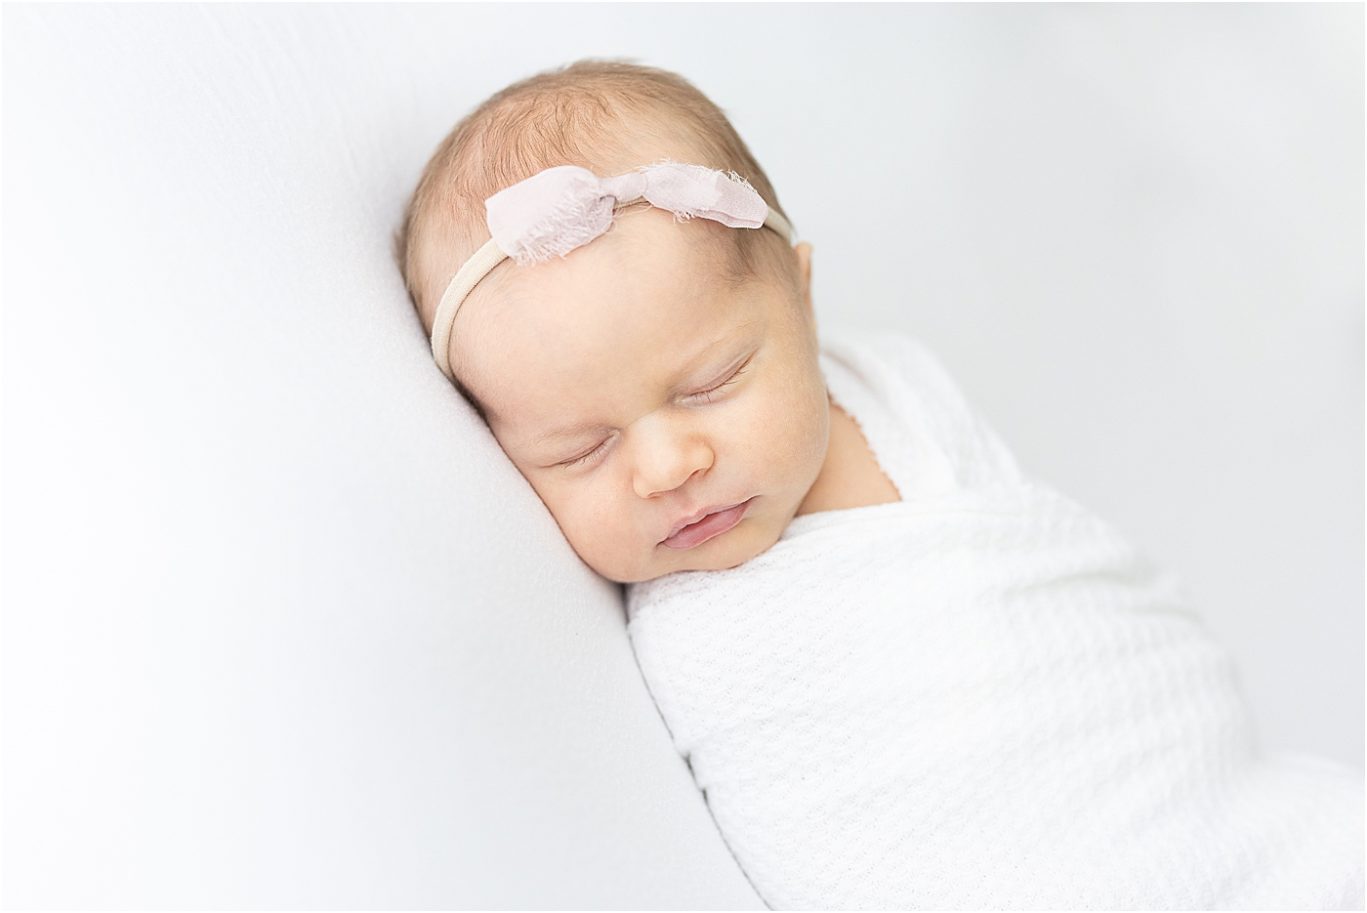 Newborn session with baby girl in studio in Fishers. Photo by Lindsay Konopa Photography.